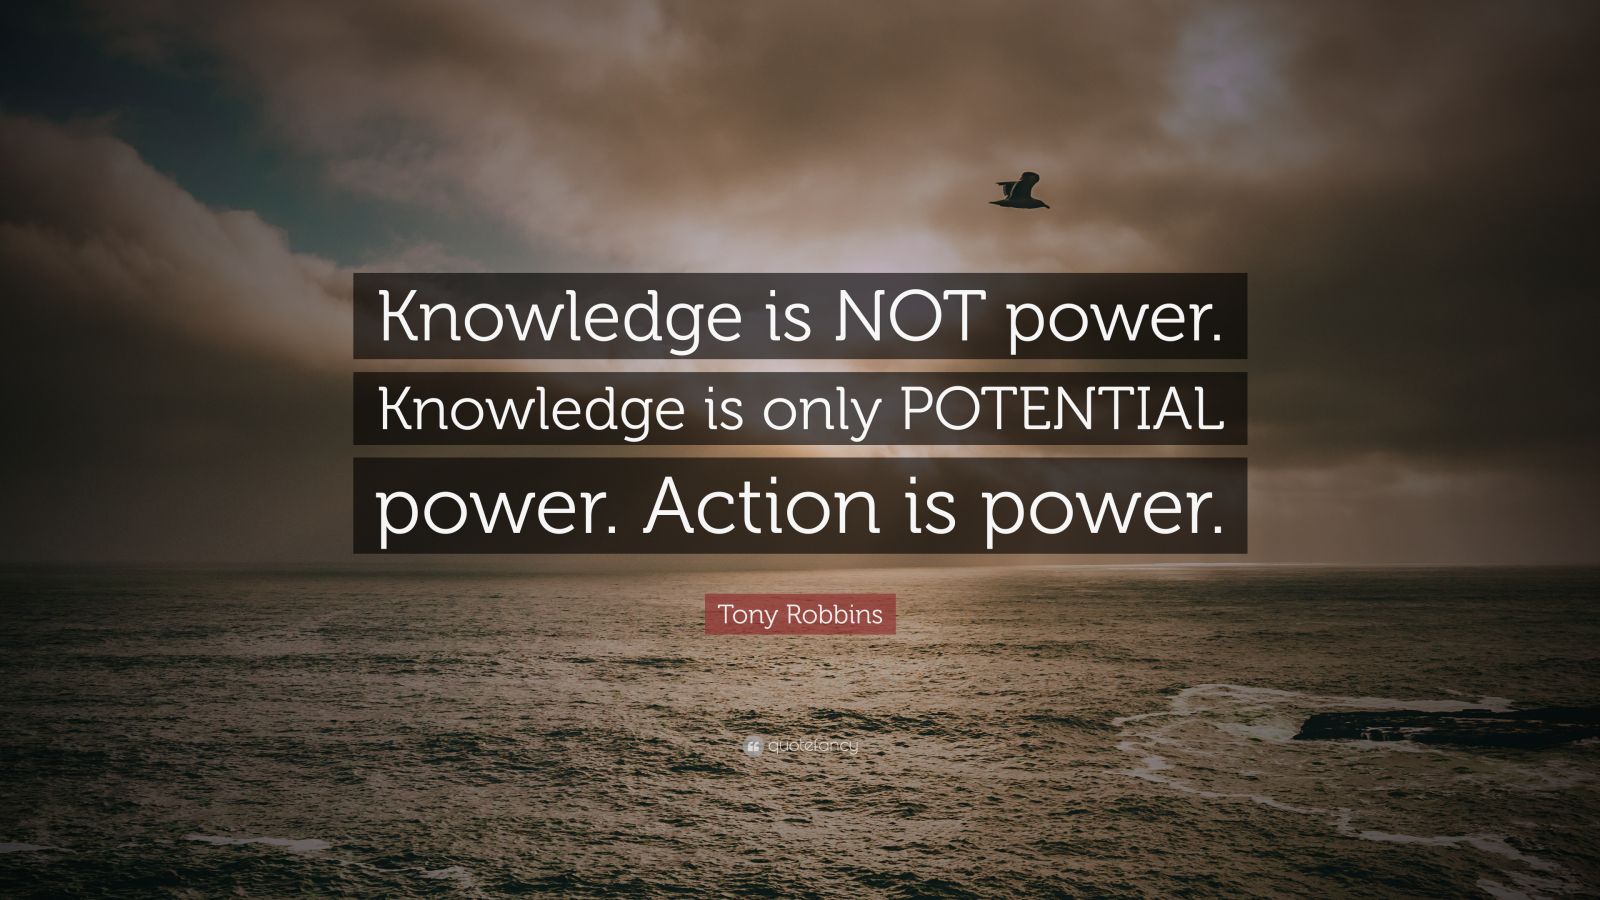 Tony Robbins Quote “Knowledge is NOT power. Knowledge is